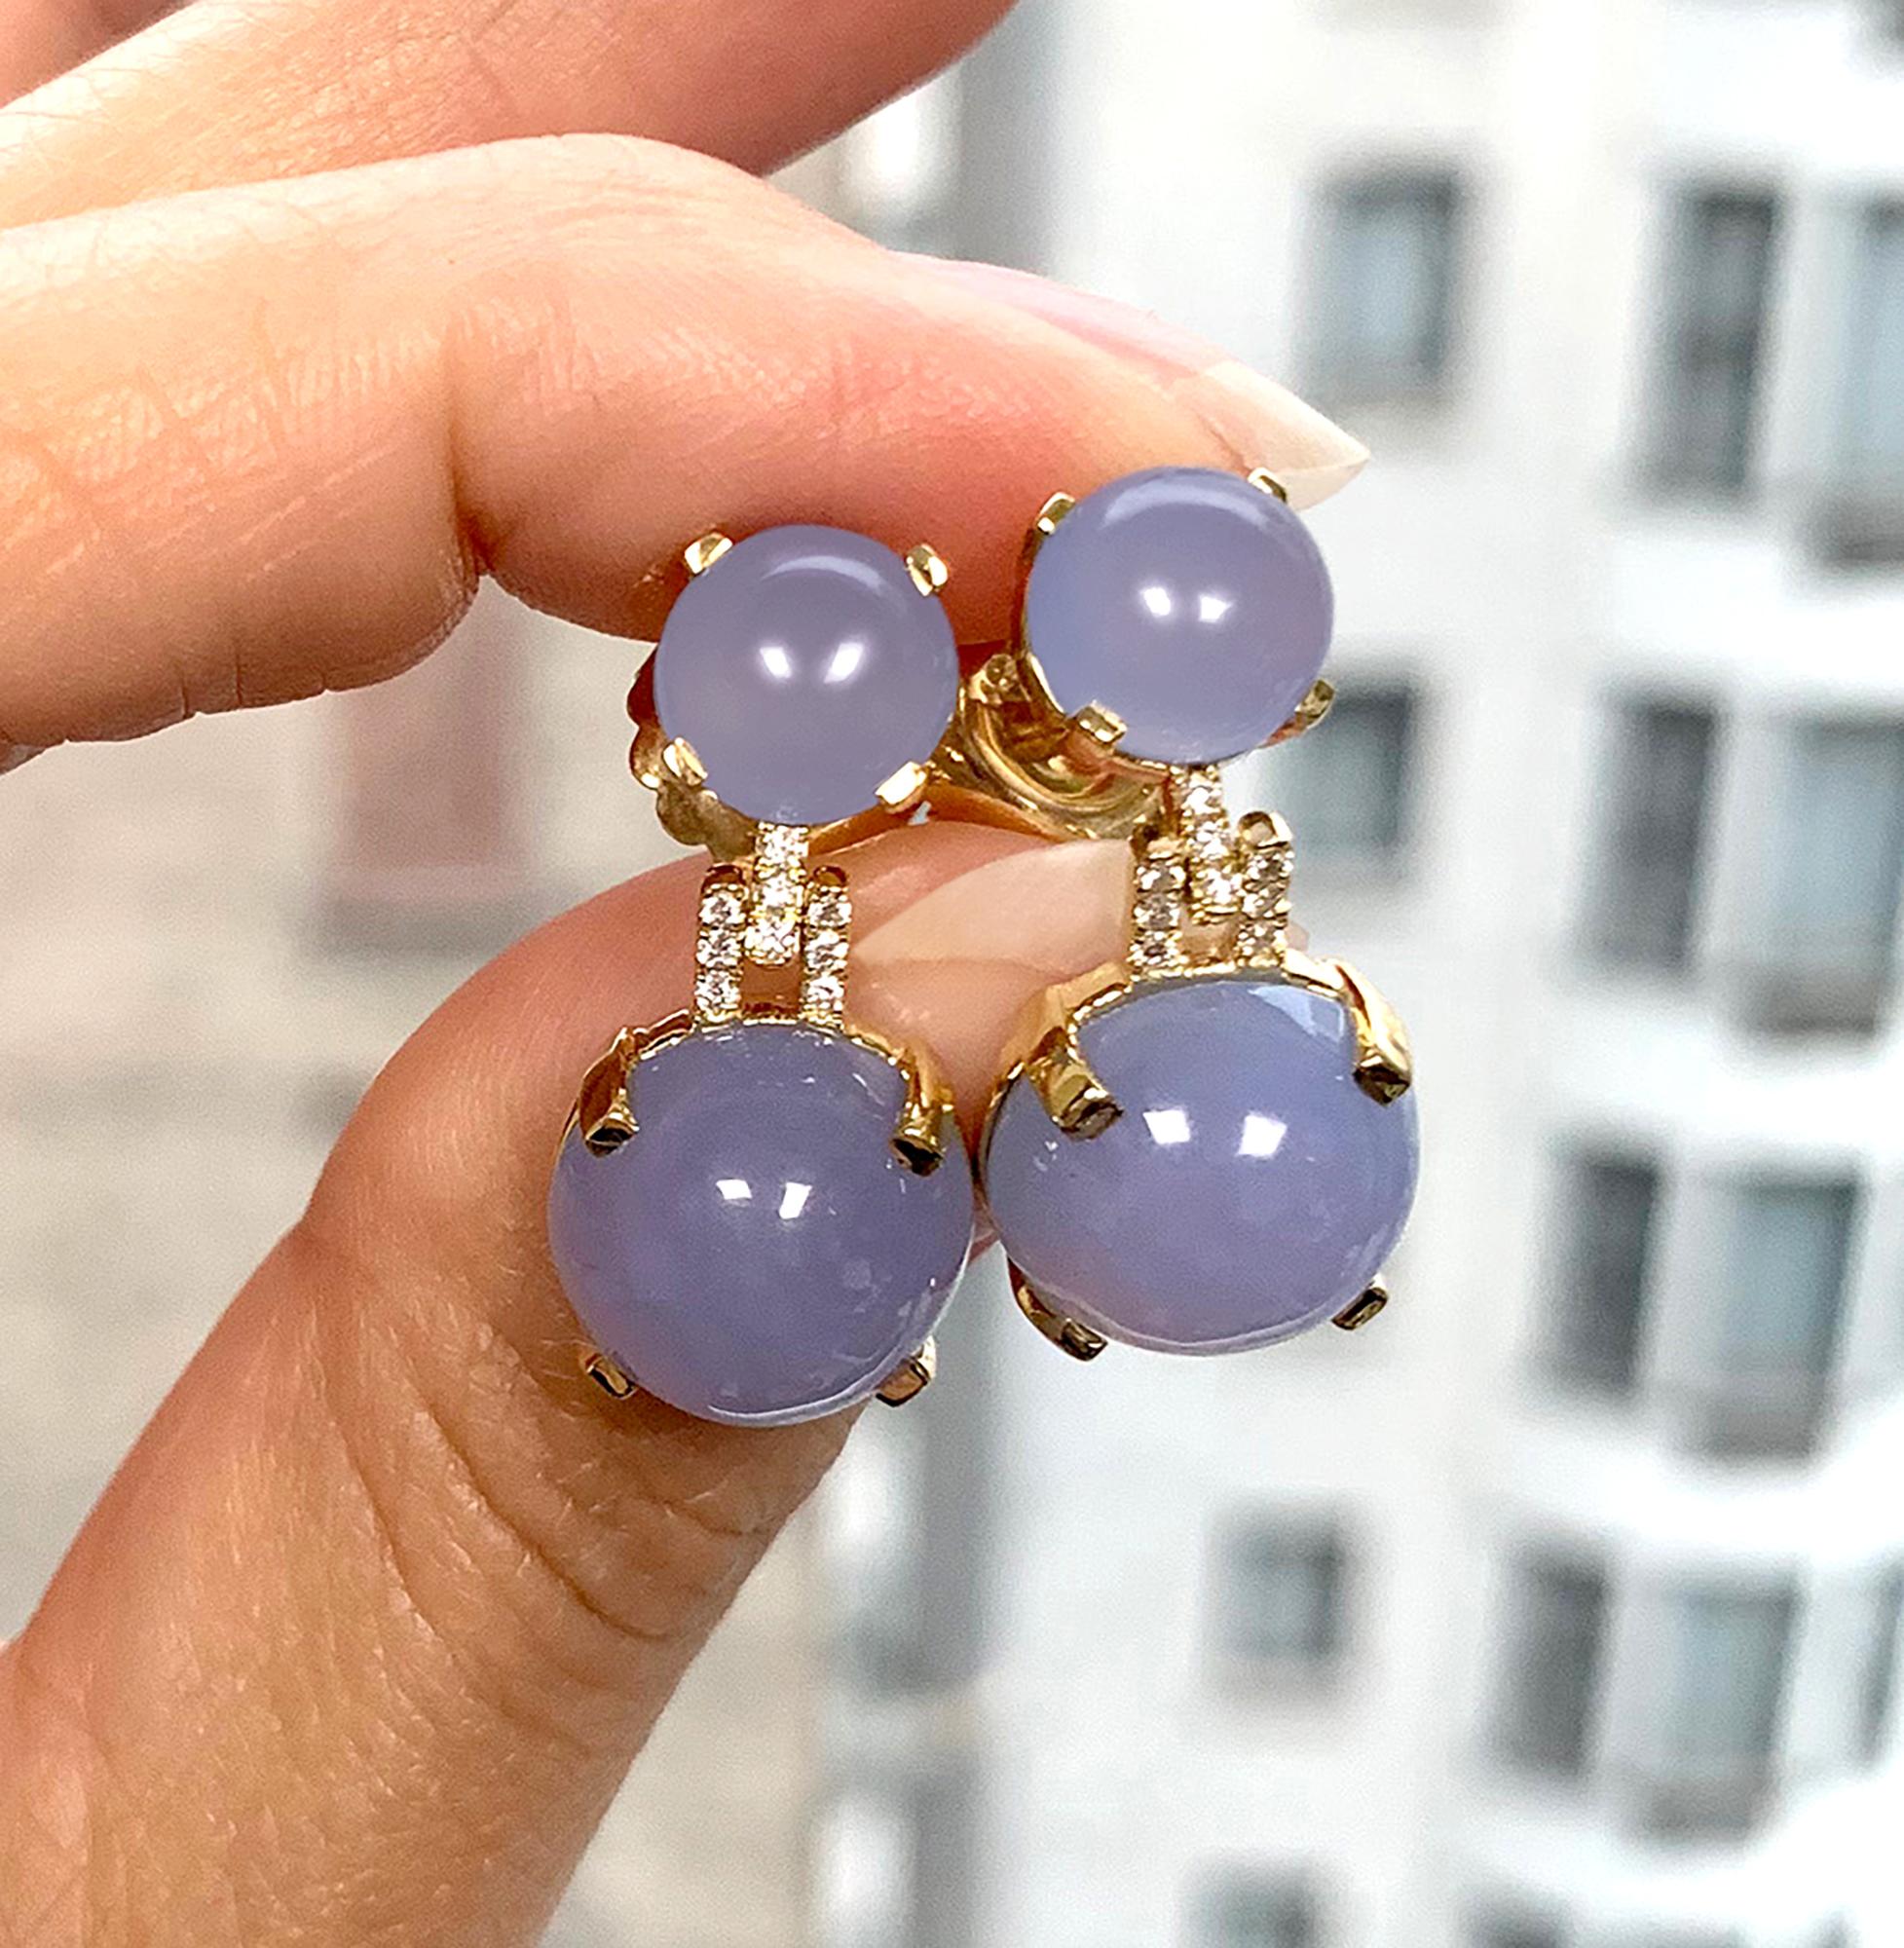 Blue Chalcedony Cabochon Earrings in 18K Yellow Gold with Diamonds, from 'Rock ‘N Roll' Collection

Stone Size: 8mm & 12mm

Diamonds: G-H / VS, Approx. Wt.: 0.10 Cts
